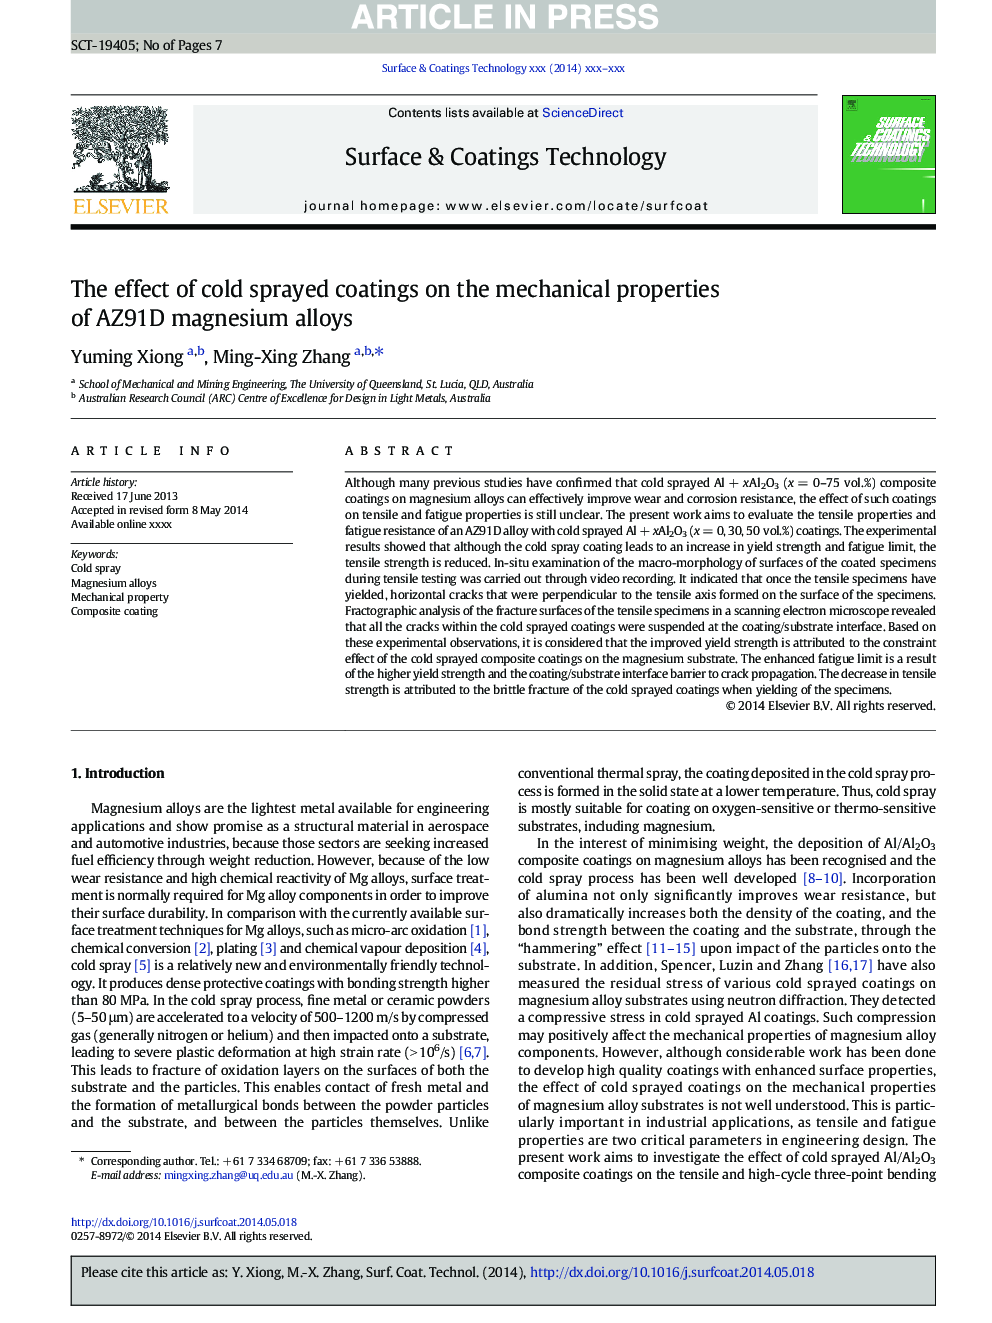 The effect of cold sprayed coatings on the mechanical properties of AZ91D magnesium alloys